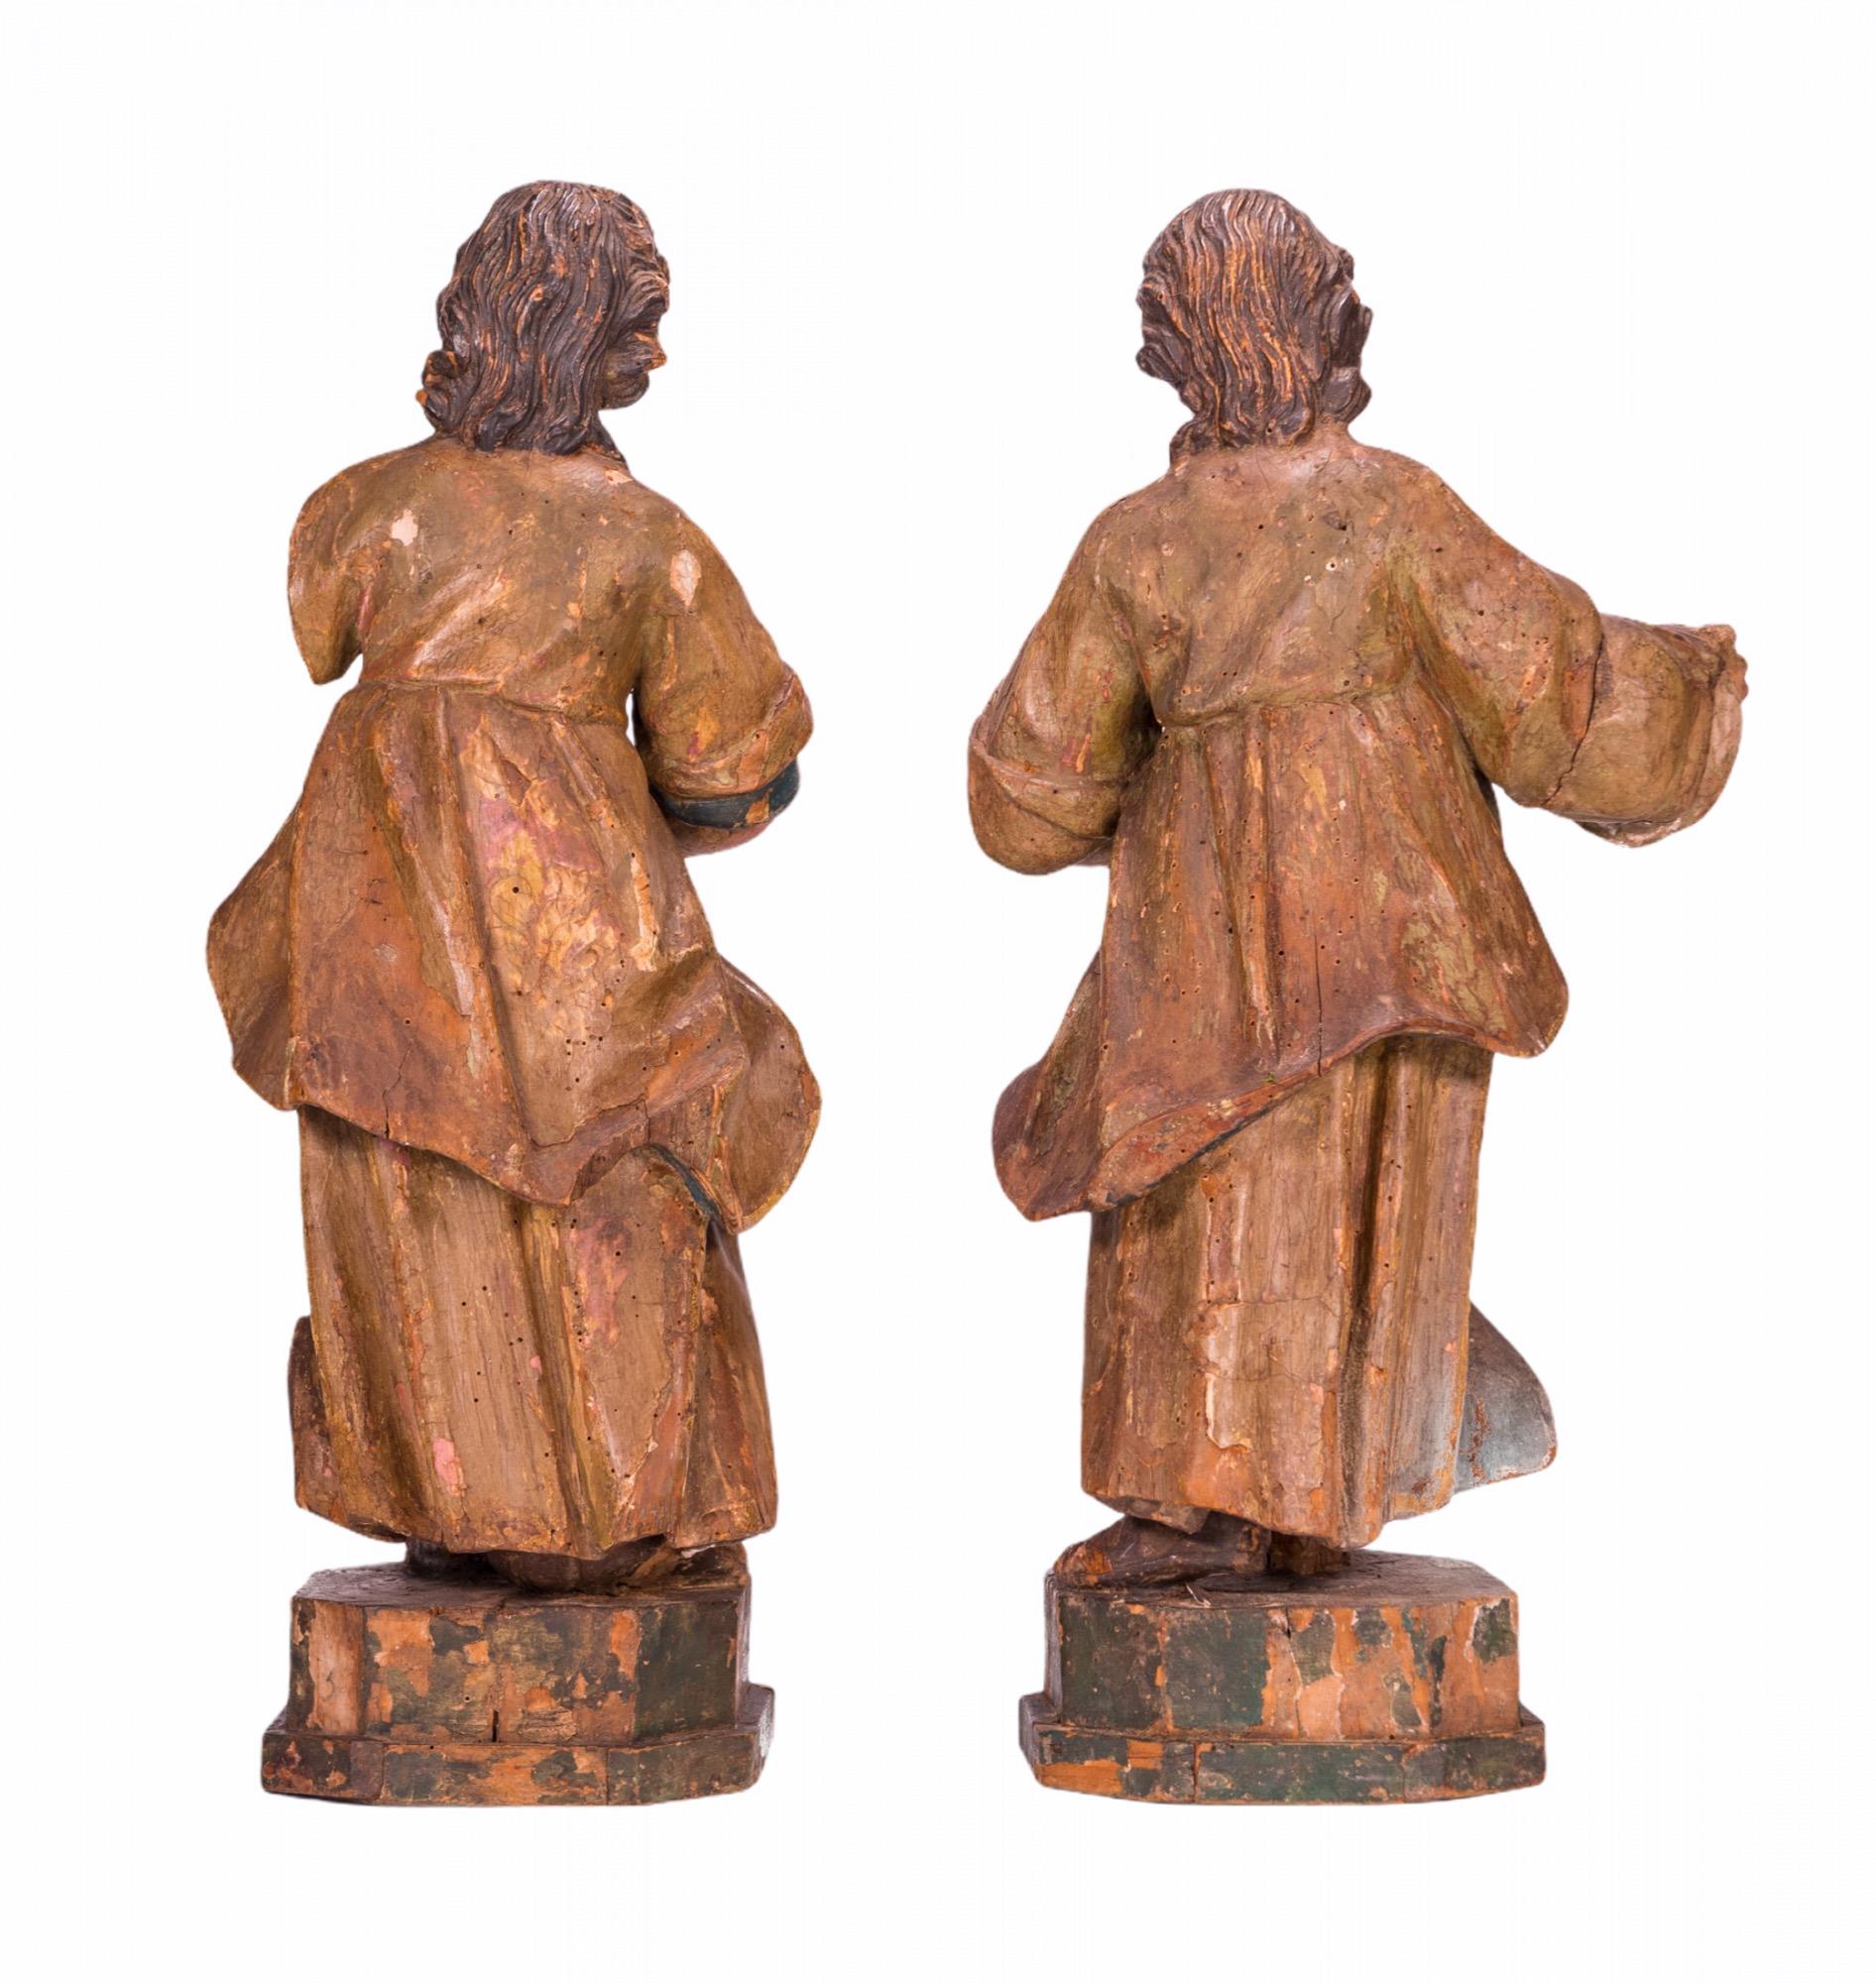 Italian Angelic Carved Wood Sculptures, 16th Century For Sale